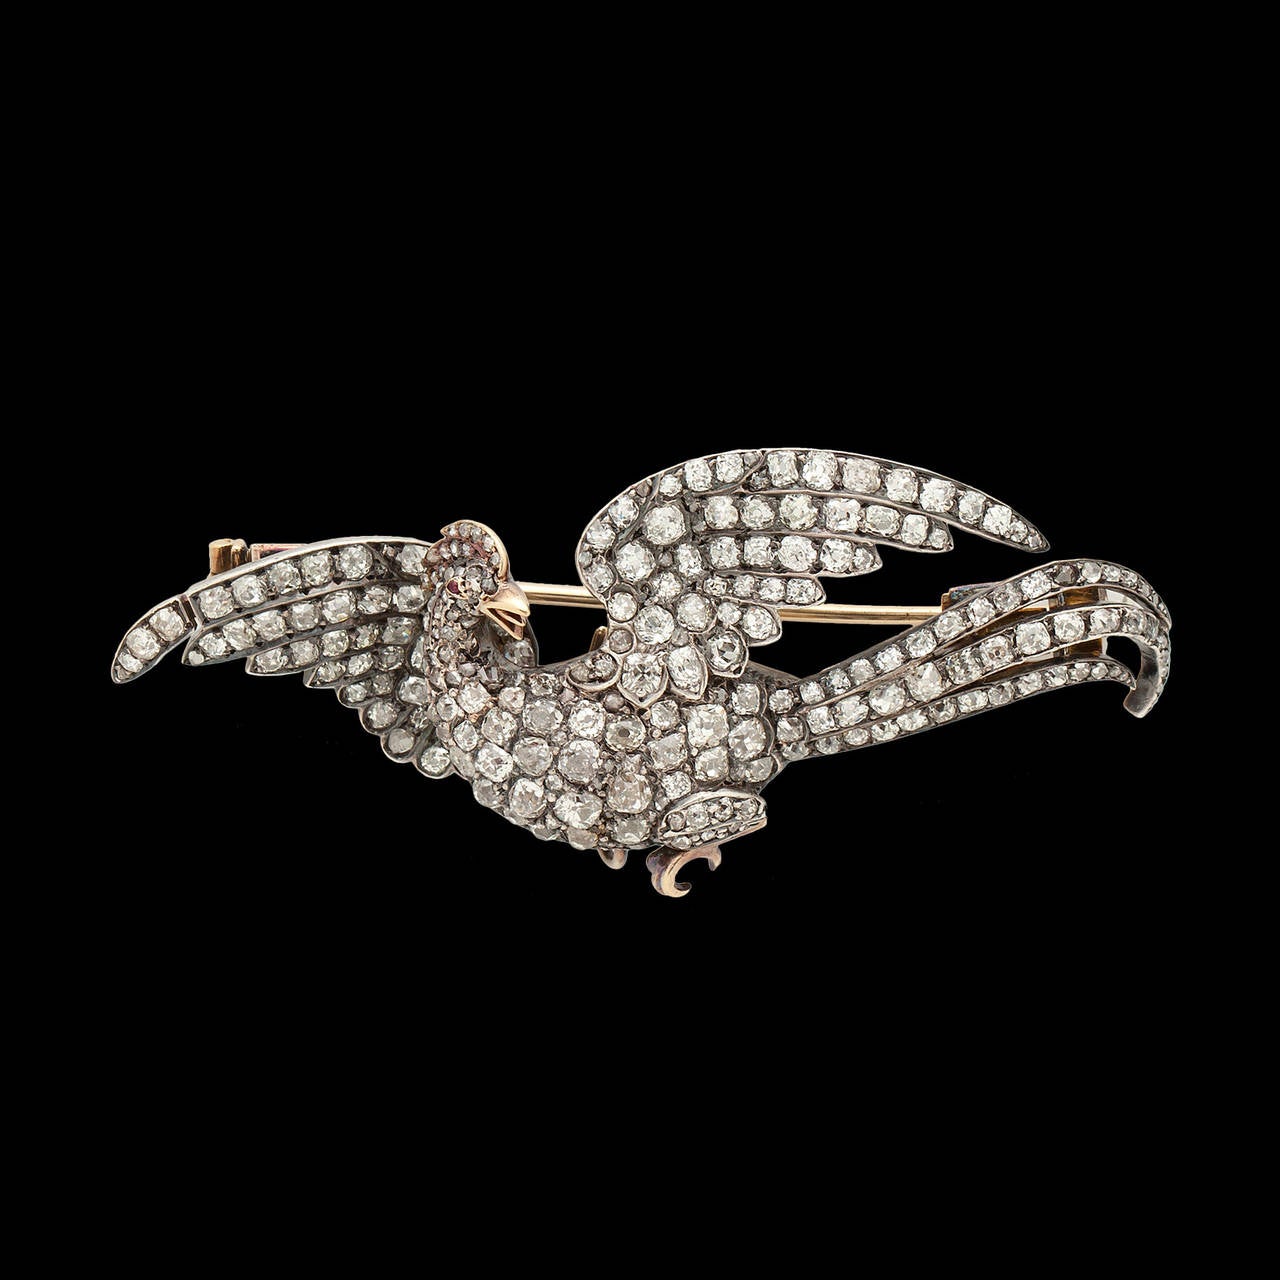 Antique 18Kt Gold Brooch Topped in Silver, Features approximately 10.00 carats of Old Cut Diamond Pave Set on a Stylized Phoenix. This piece is from the 19th century. The brooch is about 2.5 inches long and weighs 16.6 grams.